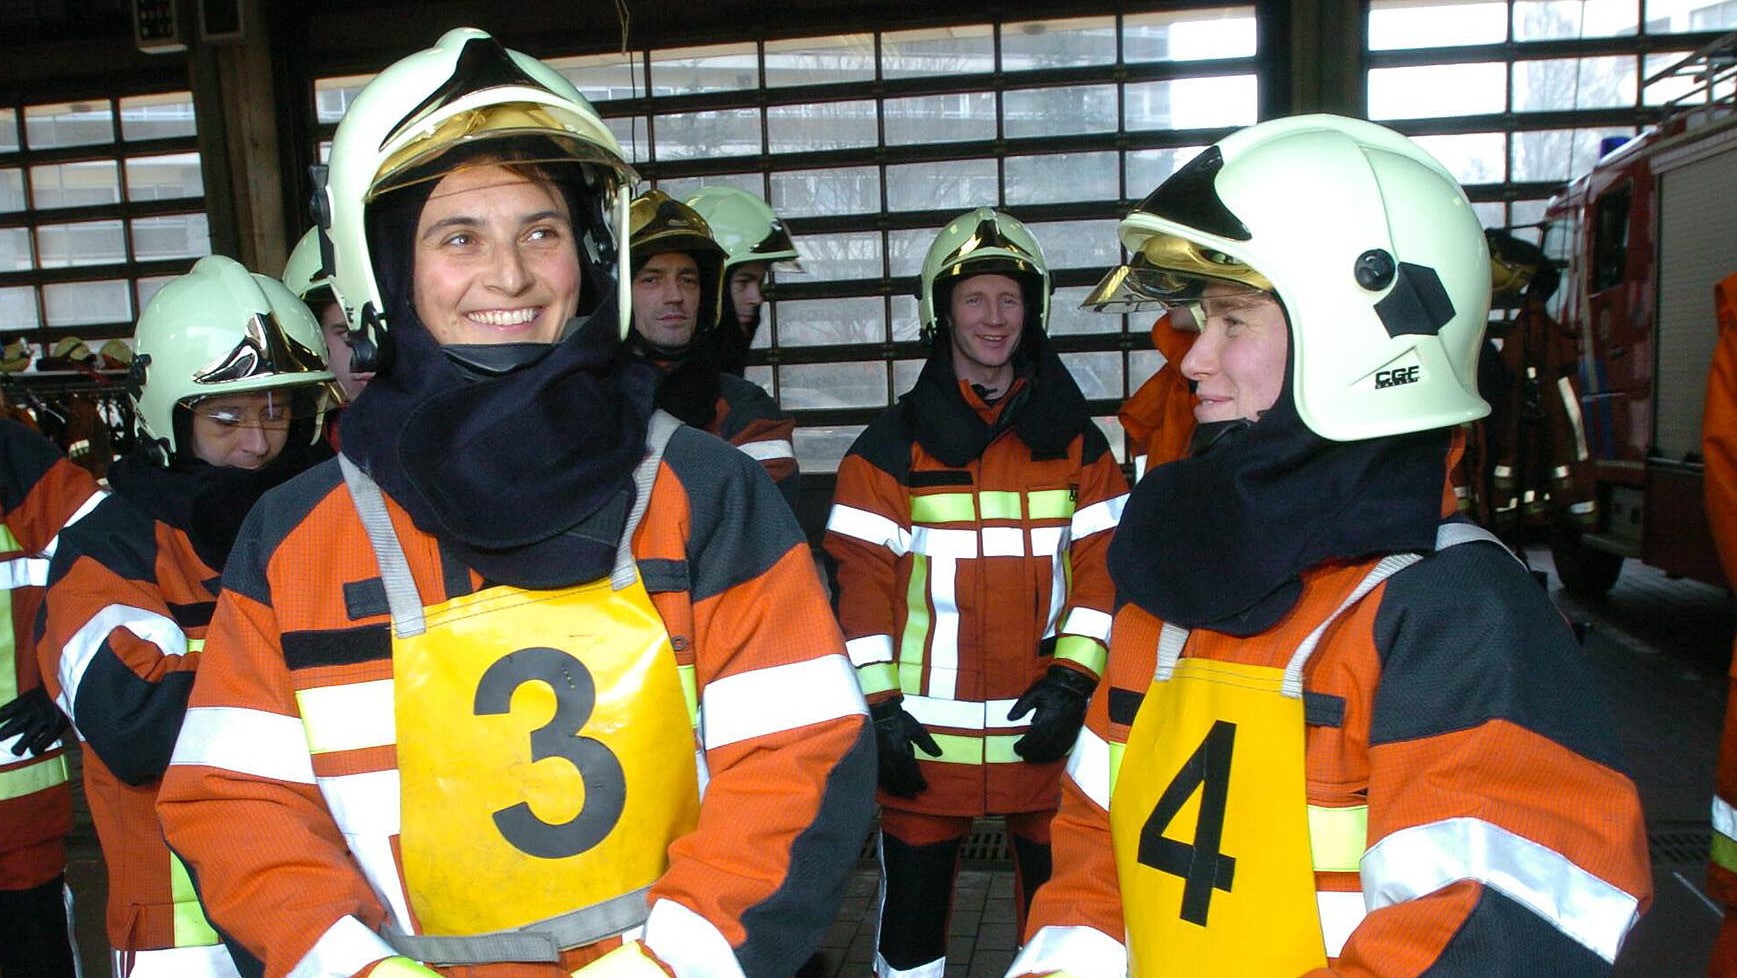 Brussels' first two women firefighters